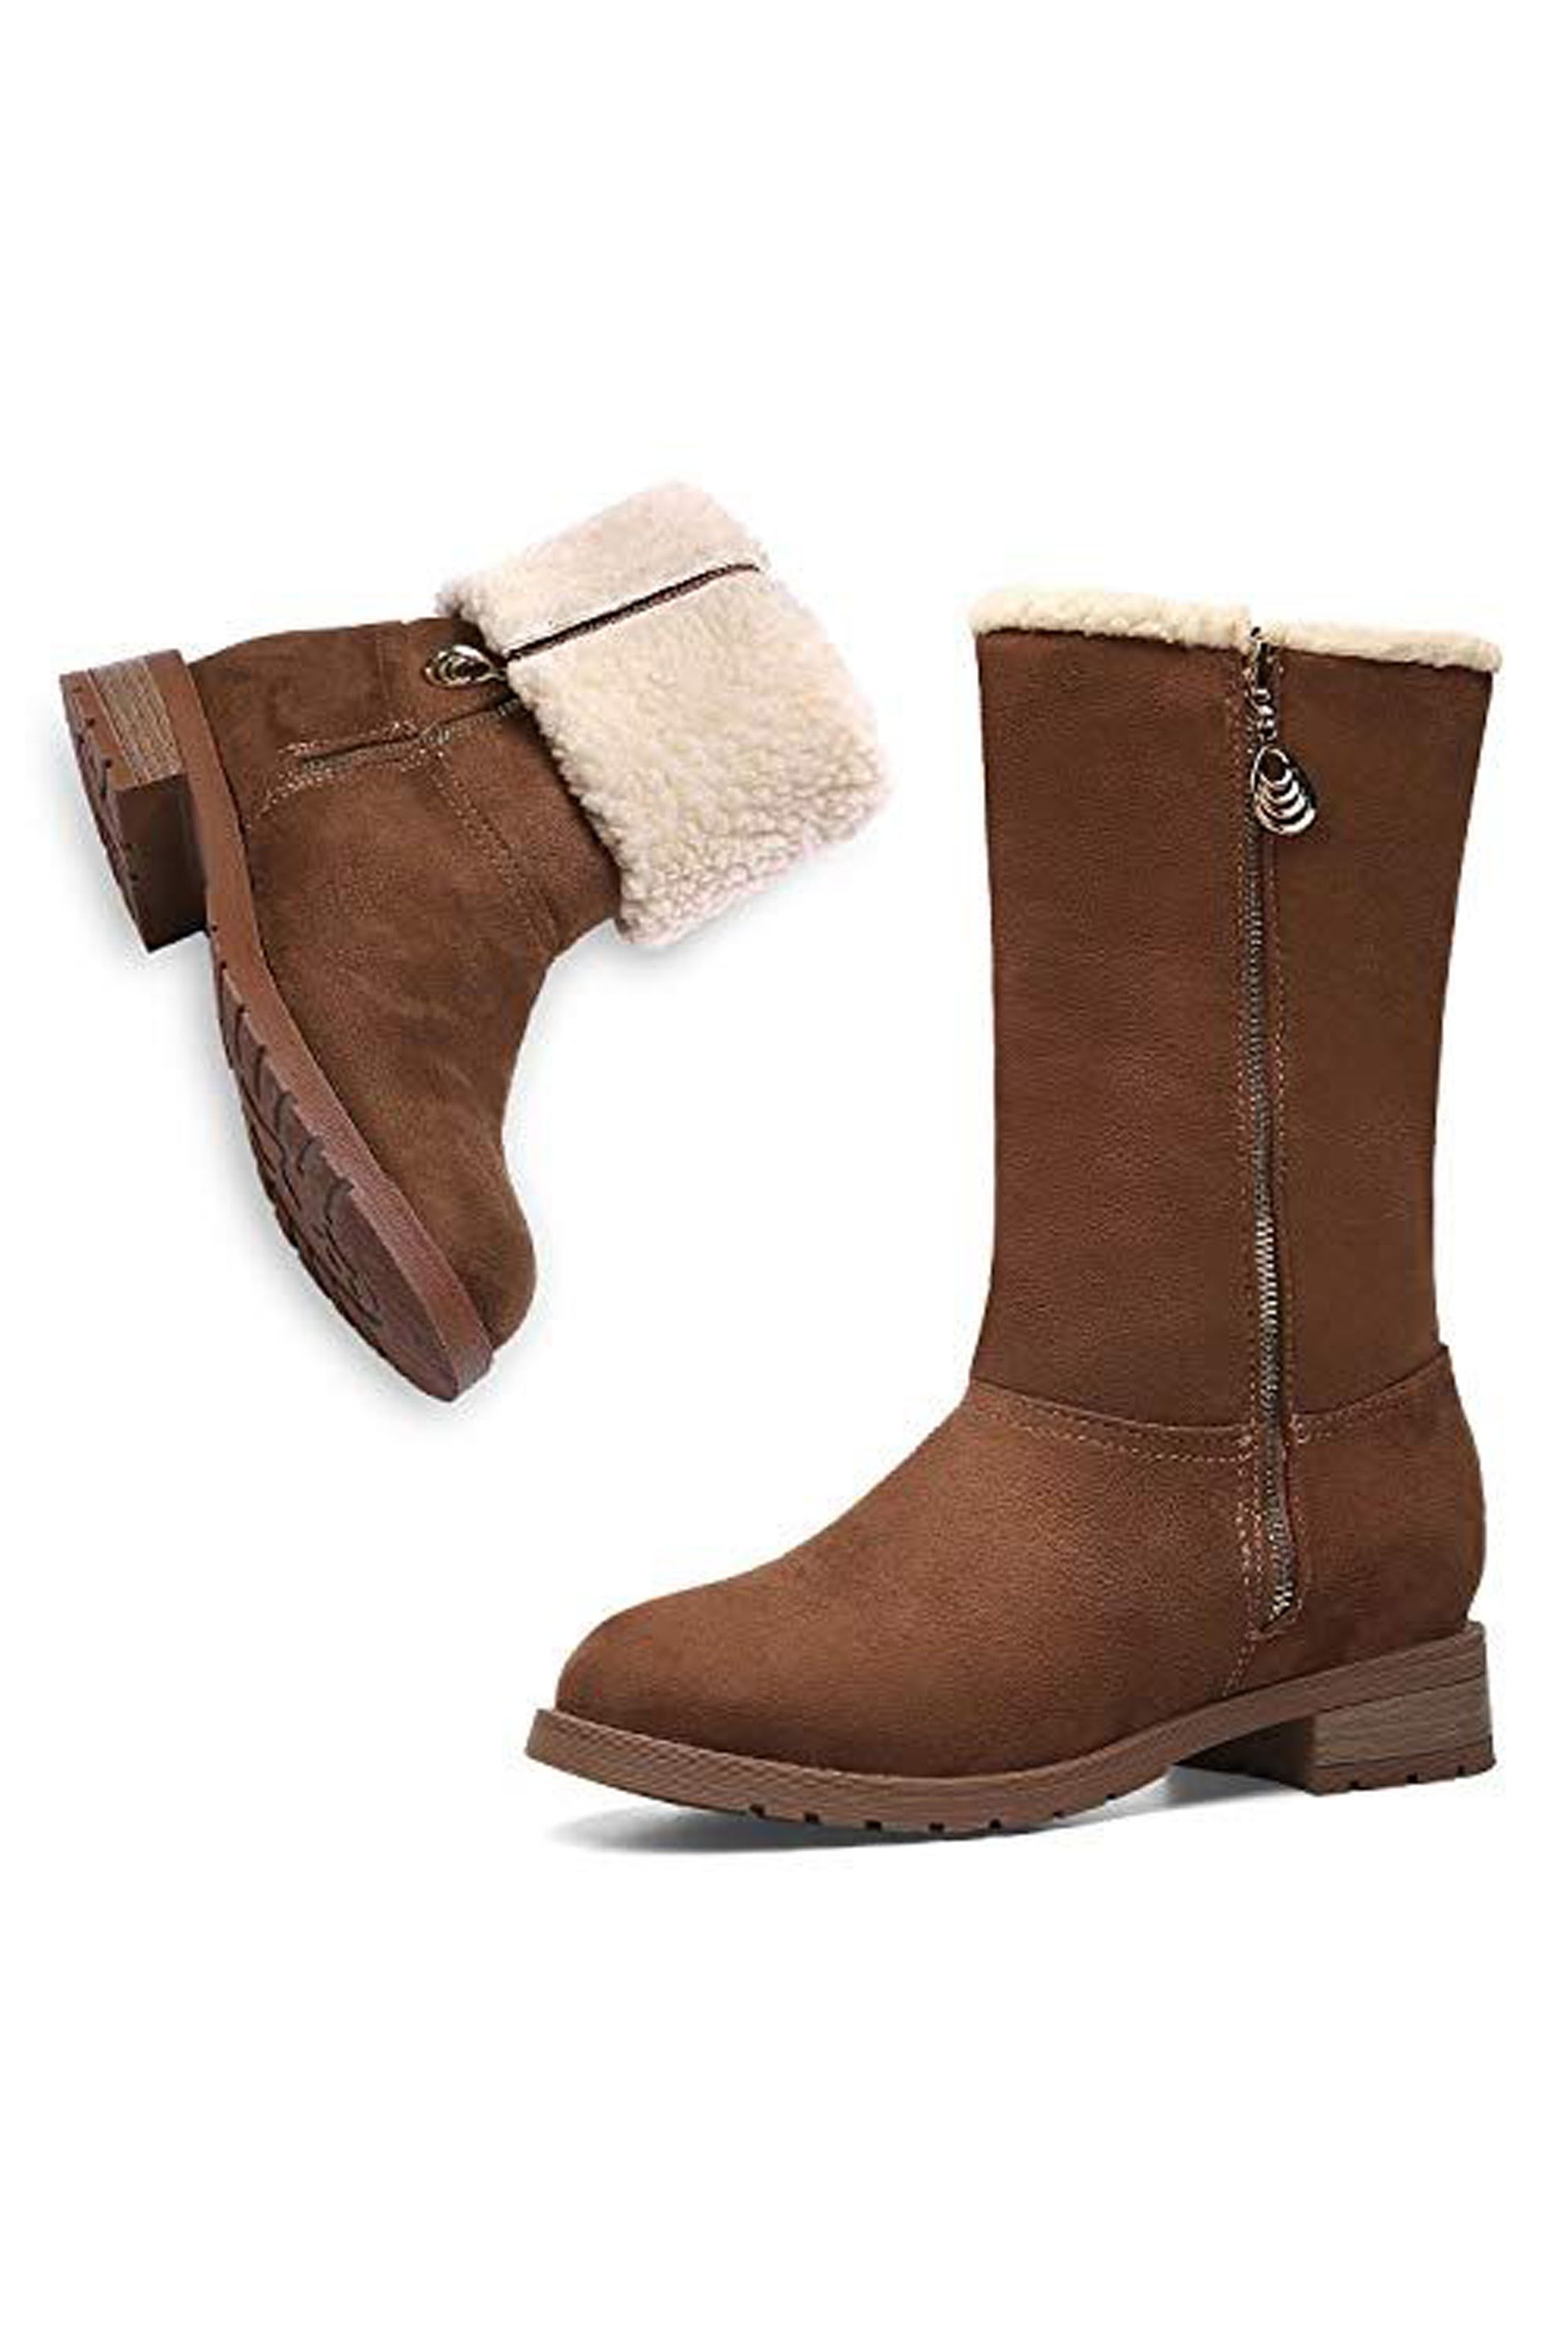 best winter boots for teenage girl